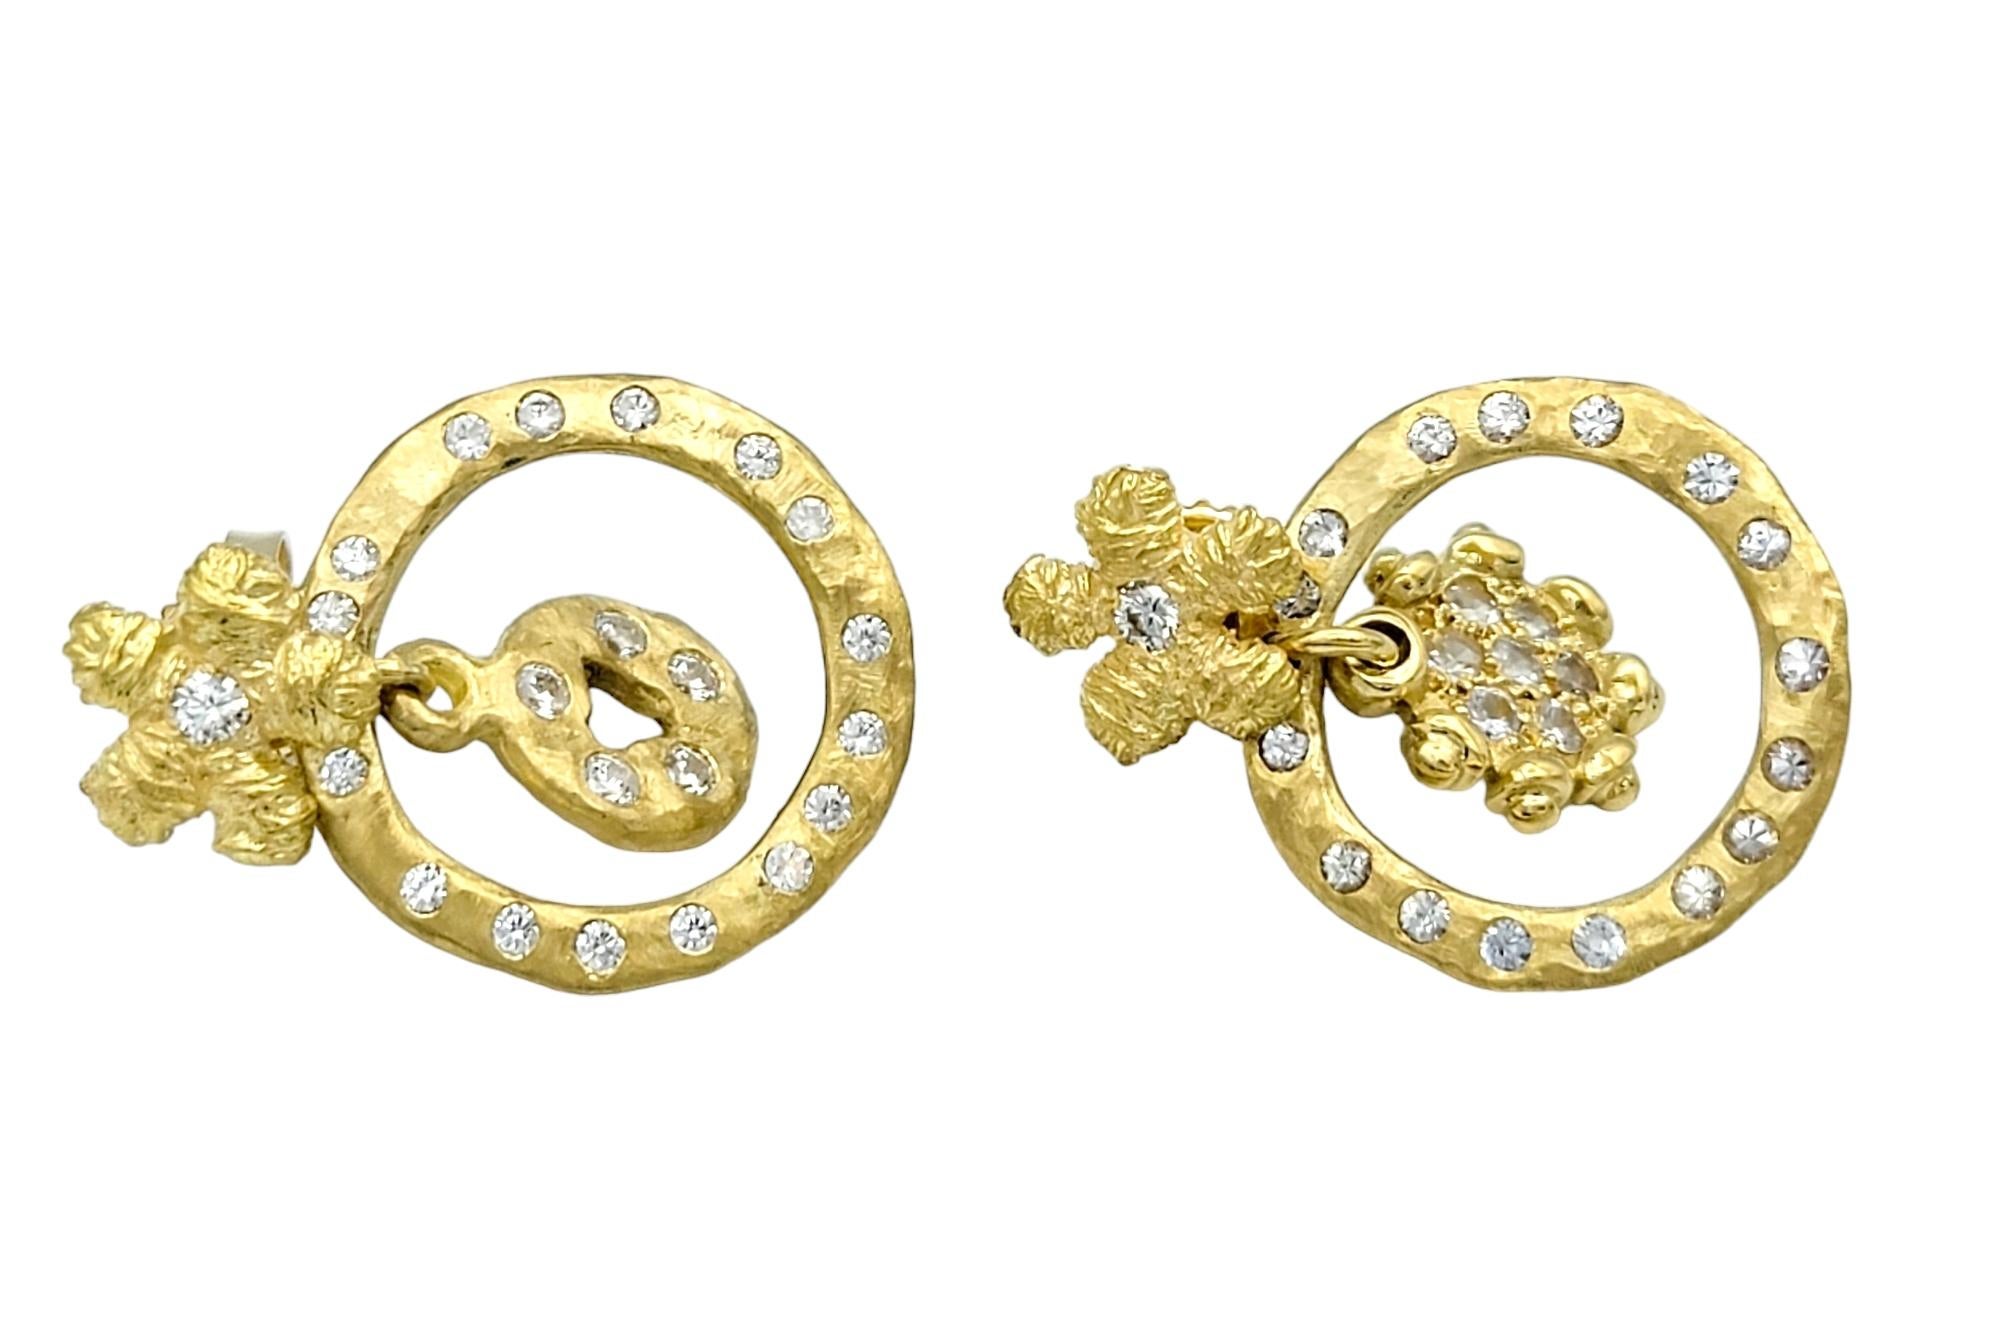 This exquisite pair of earrings, crafted in luxurious 18 karat yellow gold, is a beautiful and unique set of fine jewelry. The hammered finish provides an organic, tactile quality, adding a unique texture and shape that sets them apart. The design